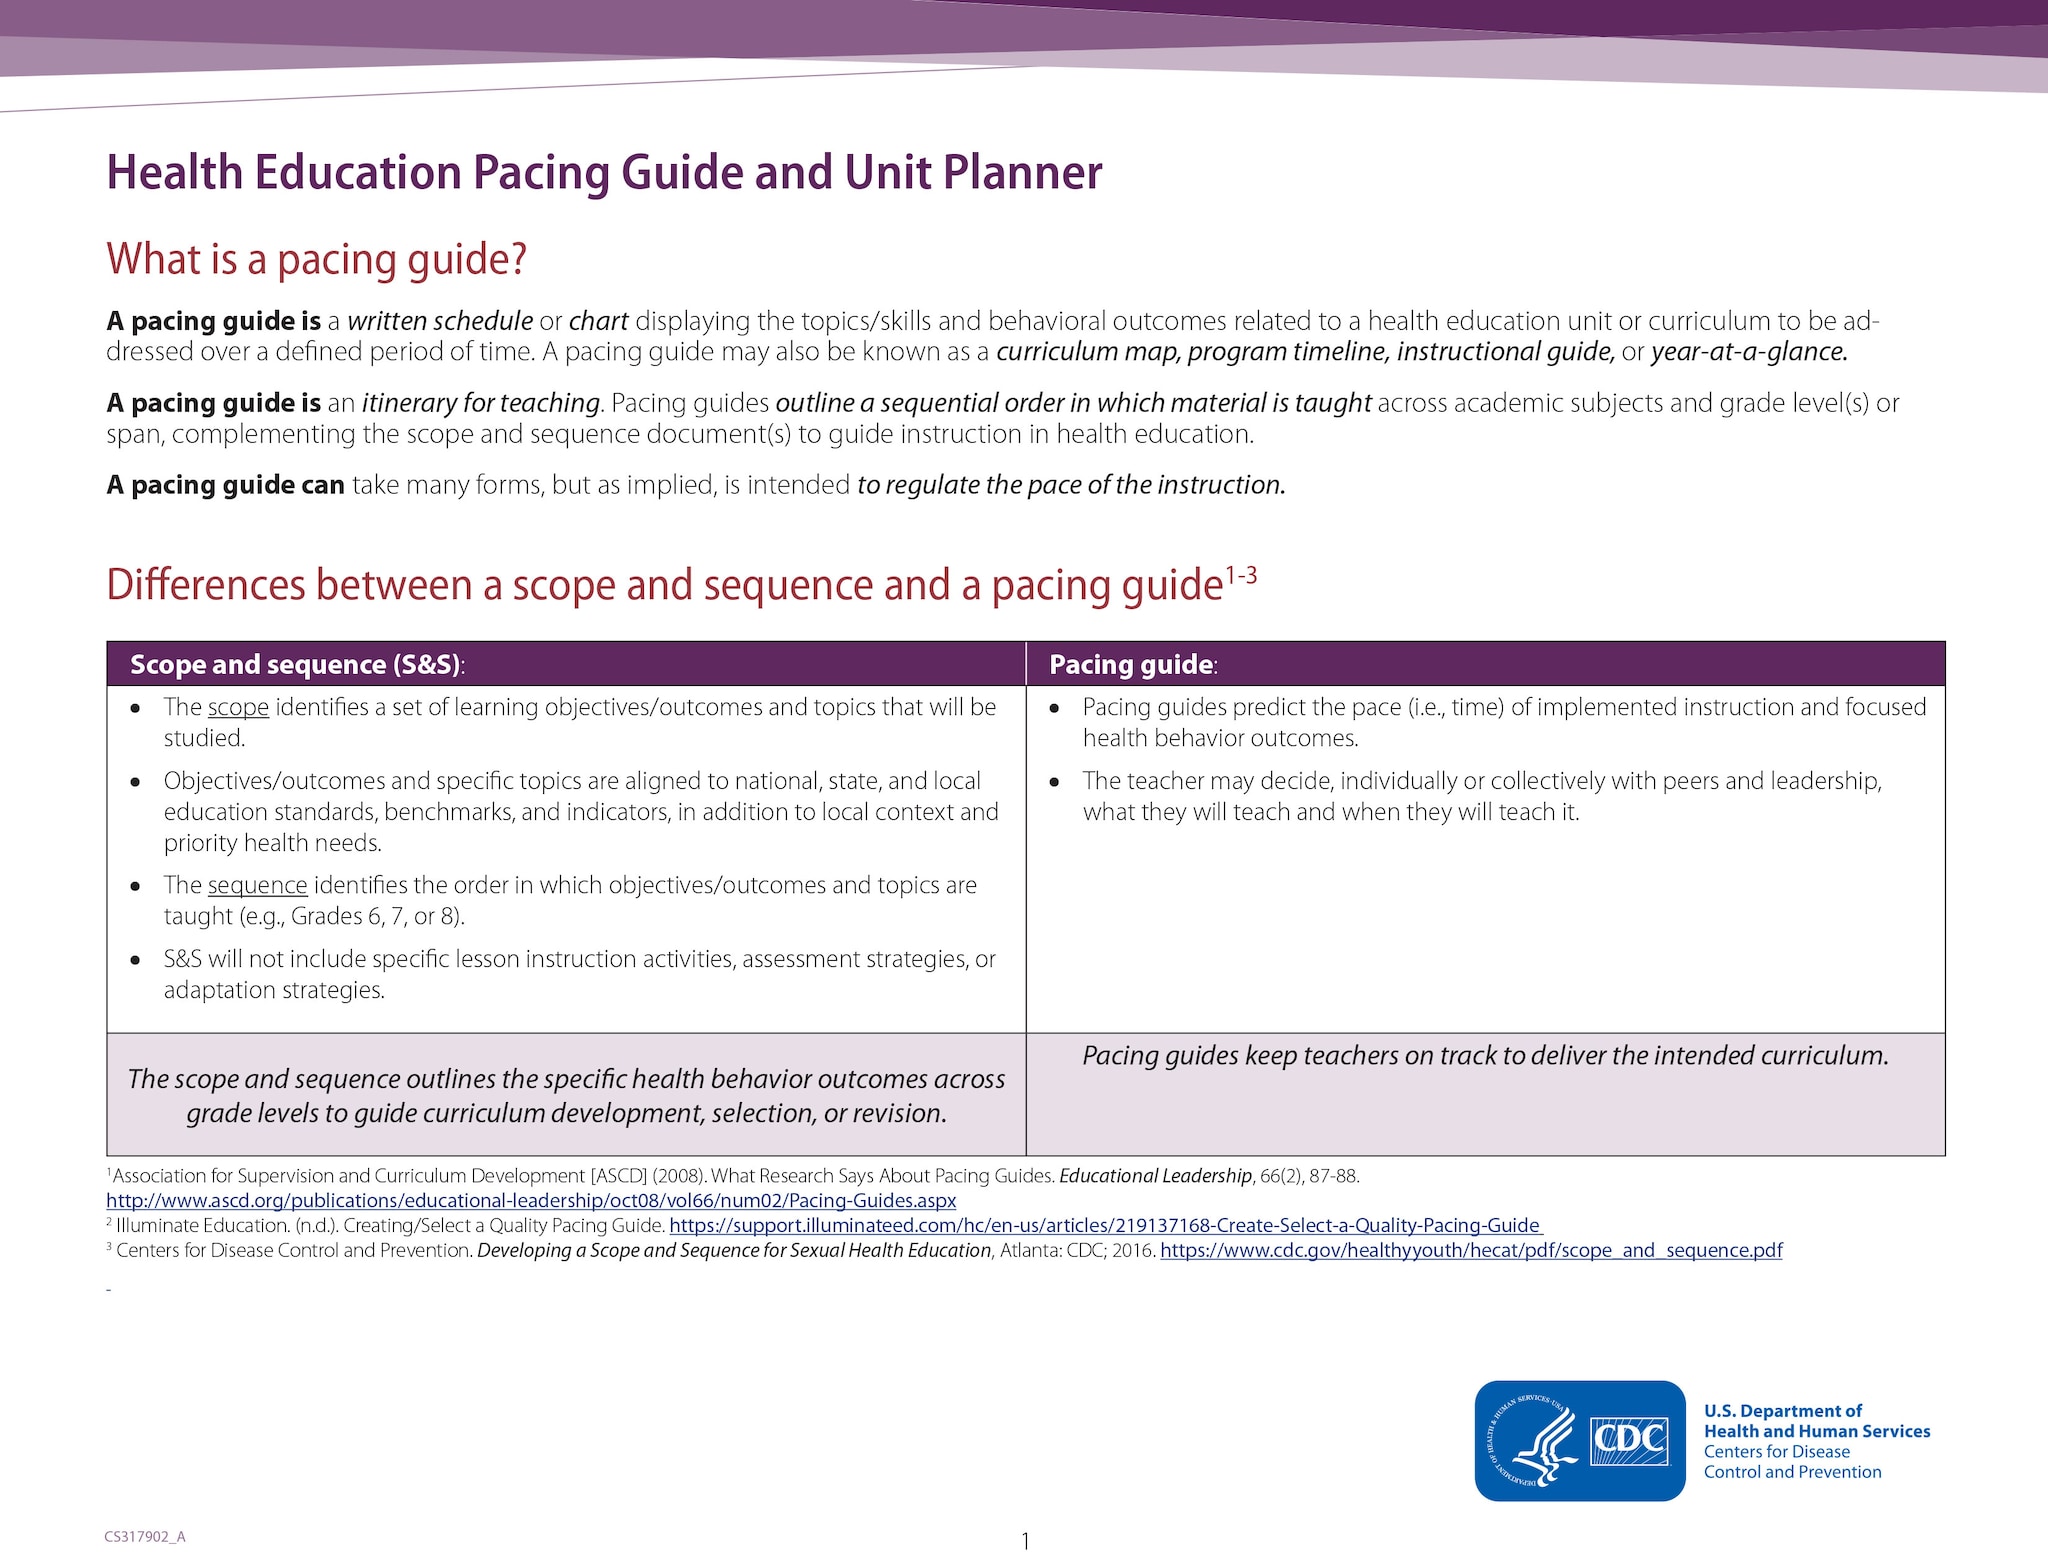 Health Education Pacing Guide and Unit Planner cover image